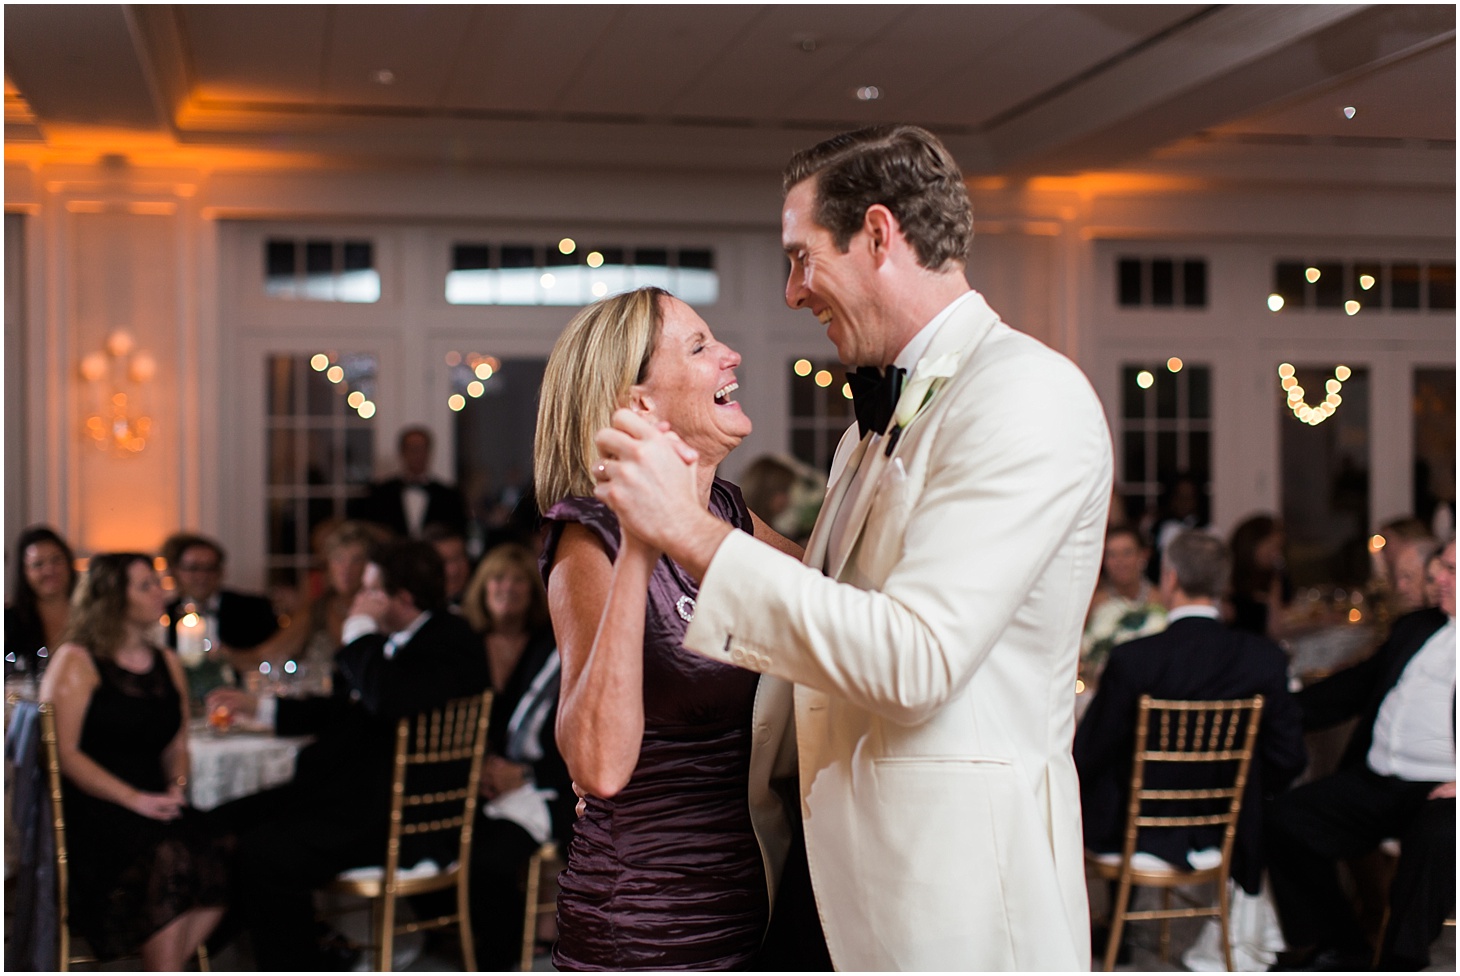 Mother-Son Dance at Wedding Reception at Columbia Country Club | Wedding Ceremony at Cathedral of St. Matthew the Apostle | Classy October Wedding in Washington, D.C. | Sarah Bradshaw Photography